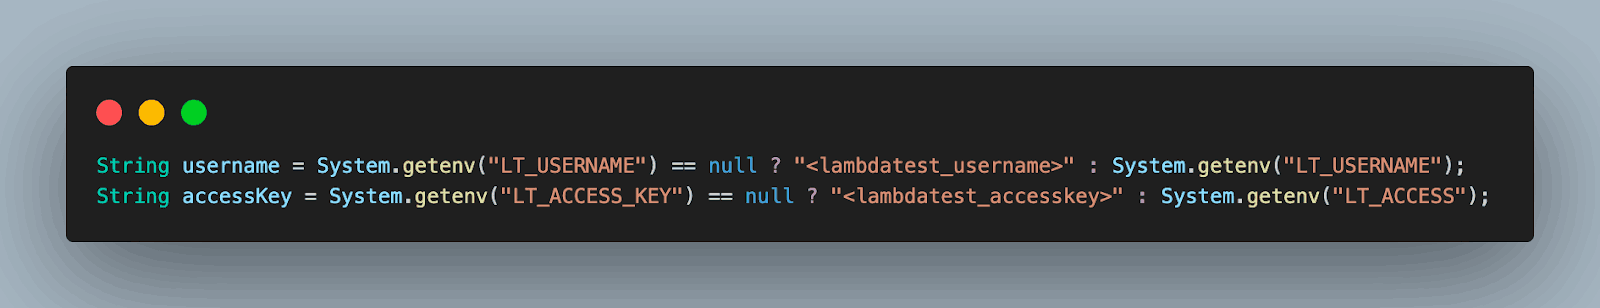 Next would be to add the LambdaTest Username and Access Key